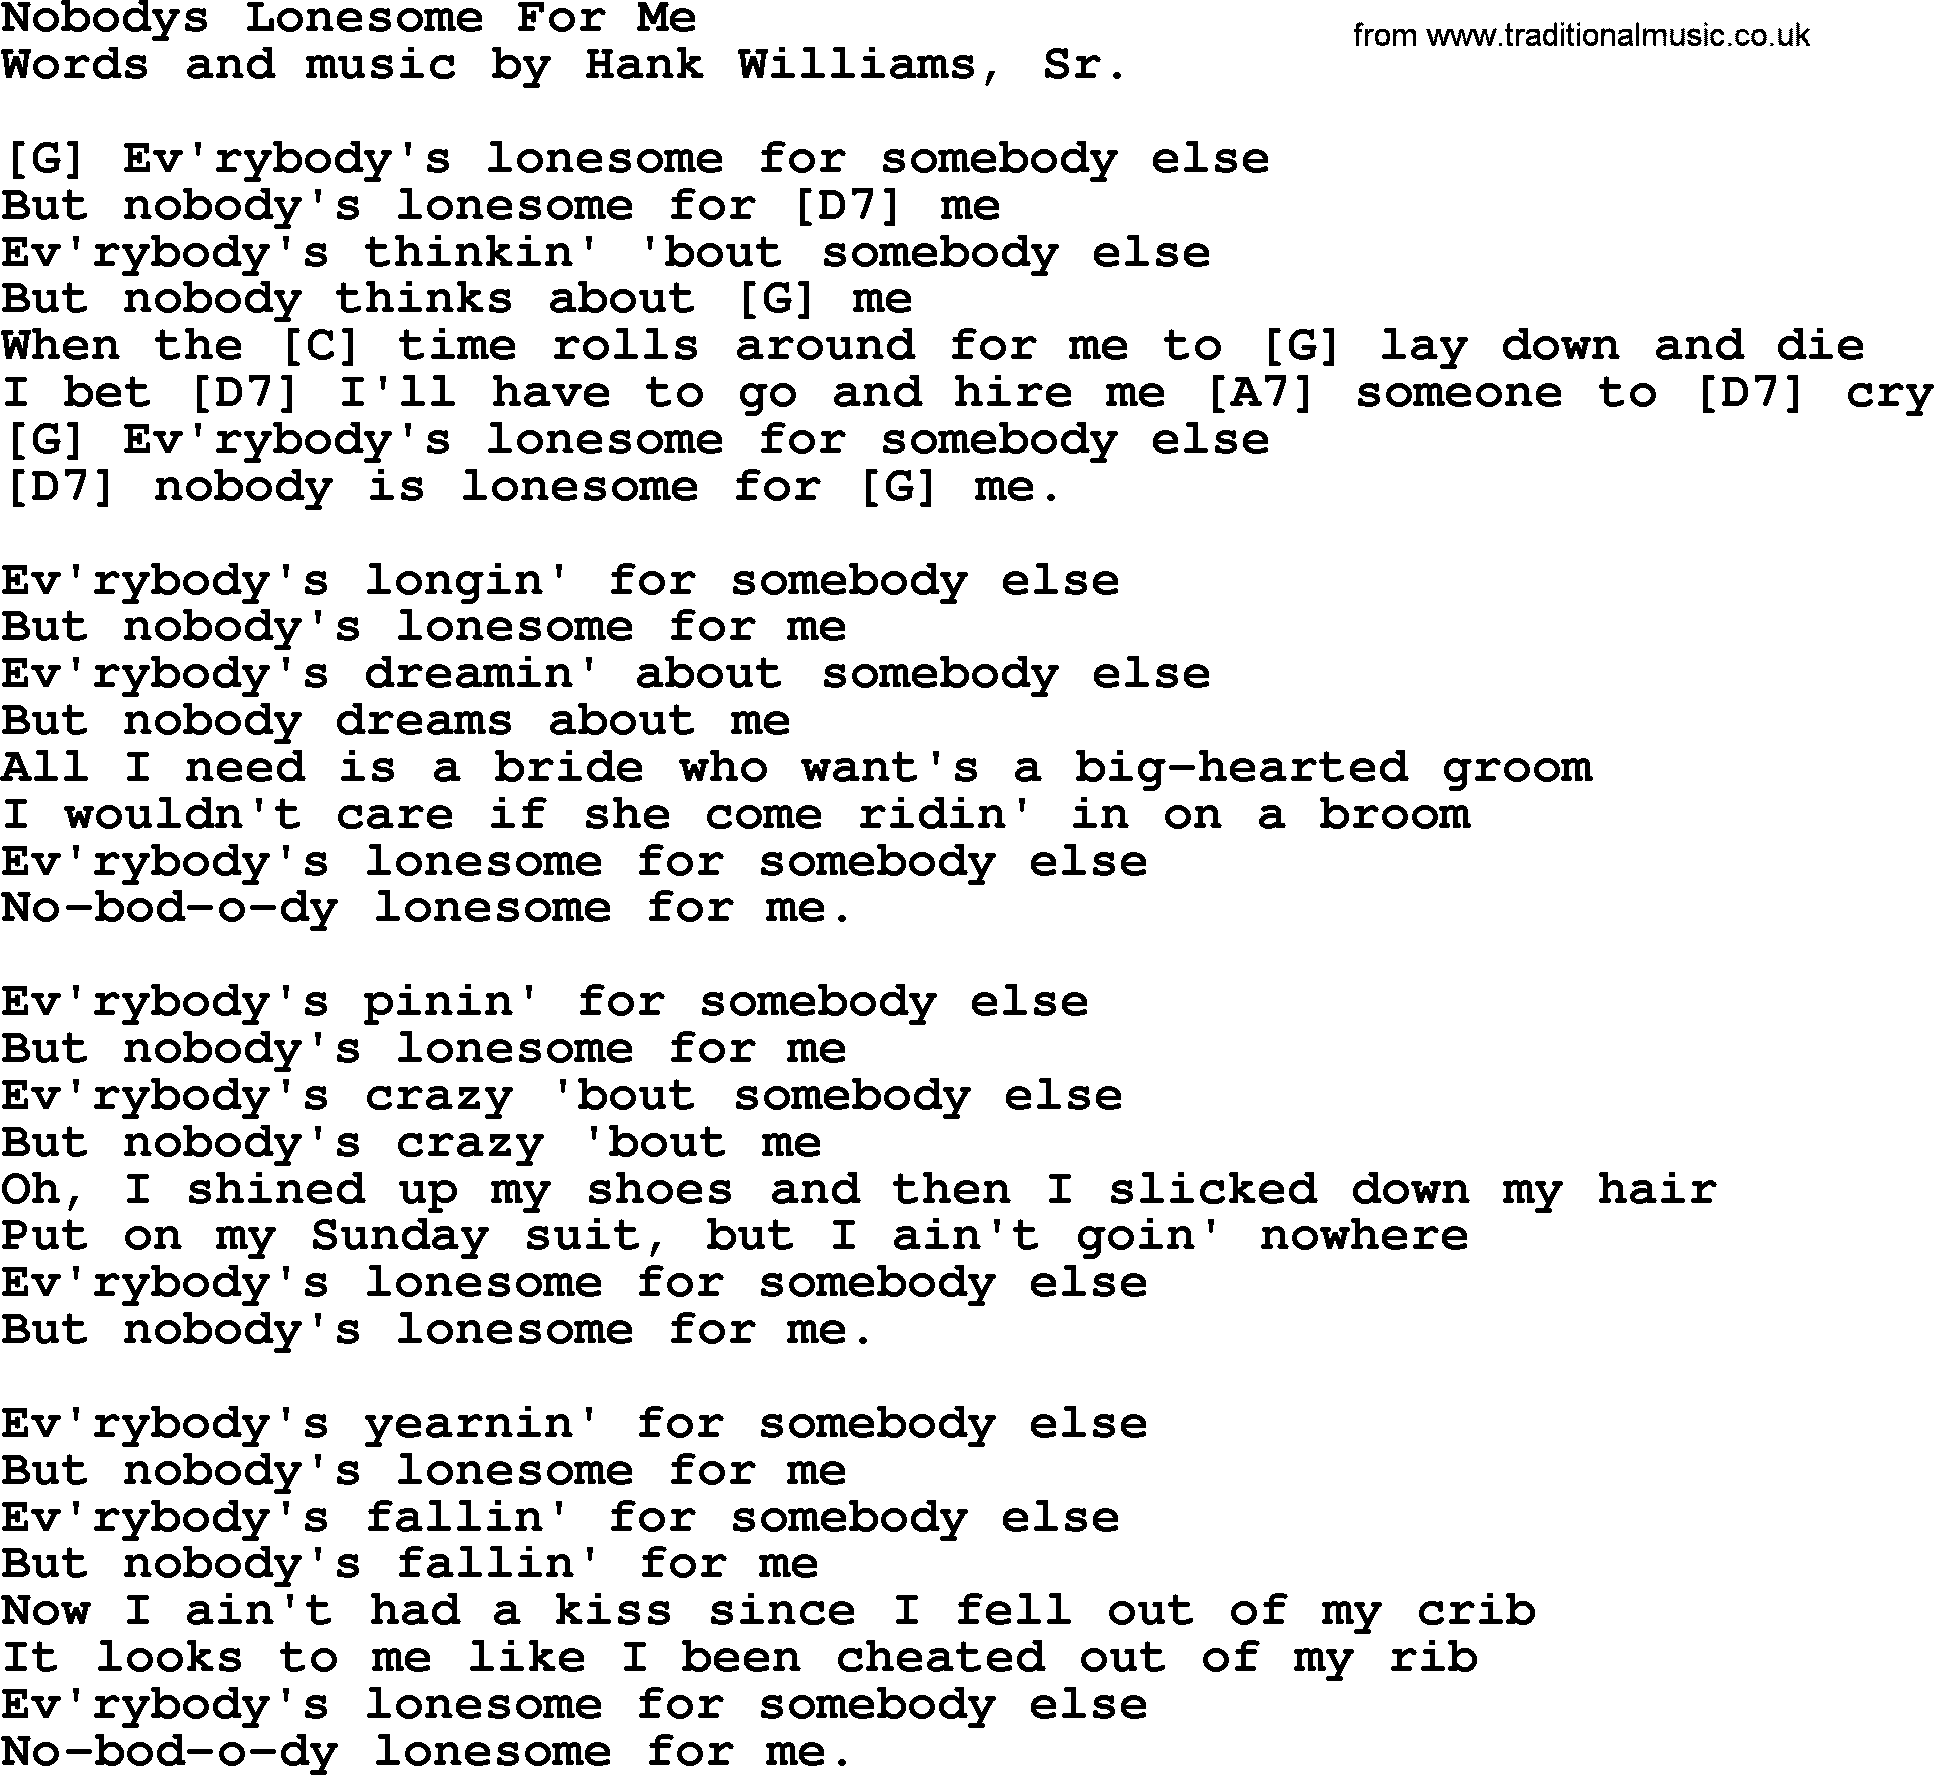 Hank Williams song Nobodys Lonesome For Me, lyrics and chords